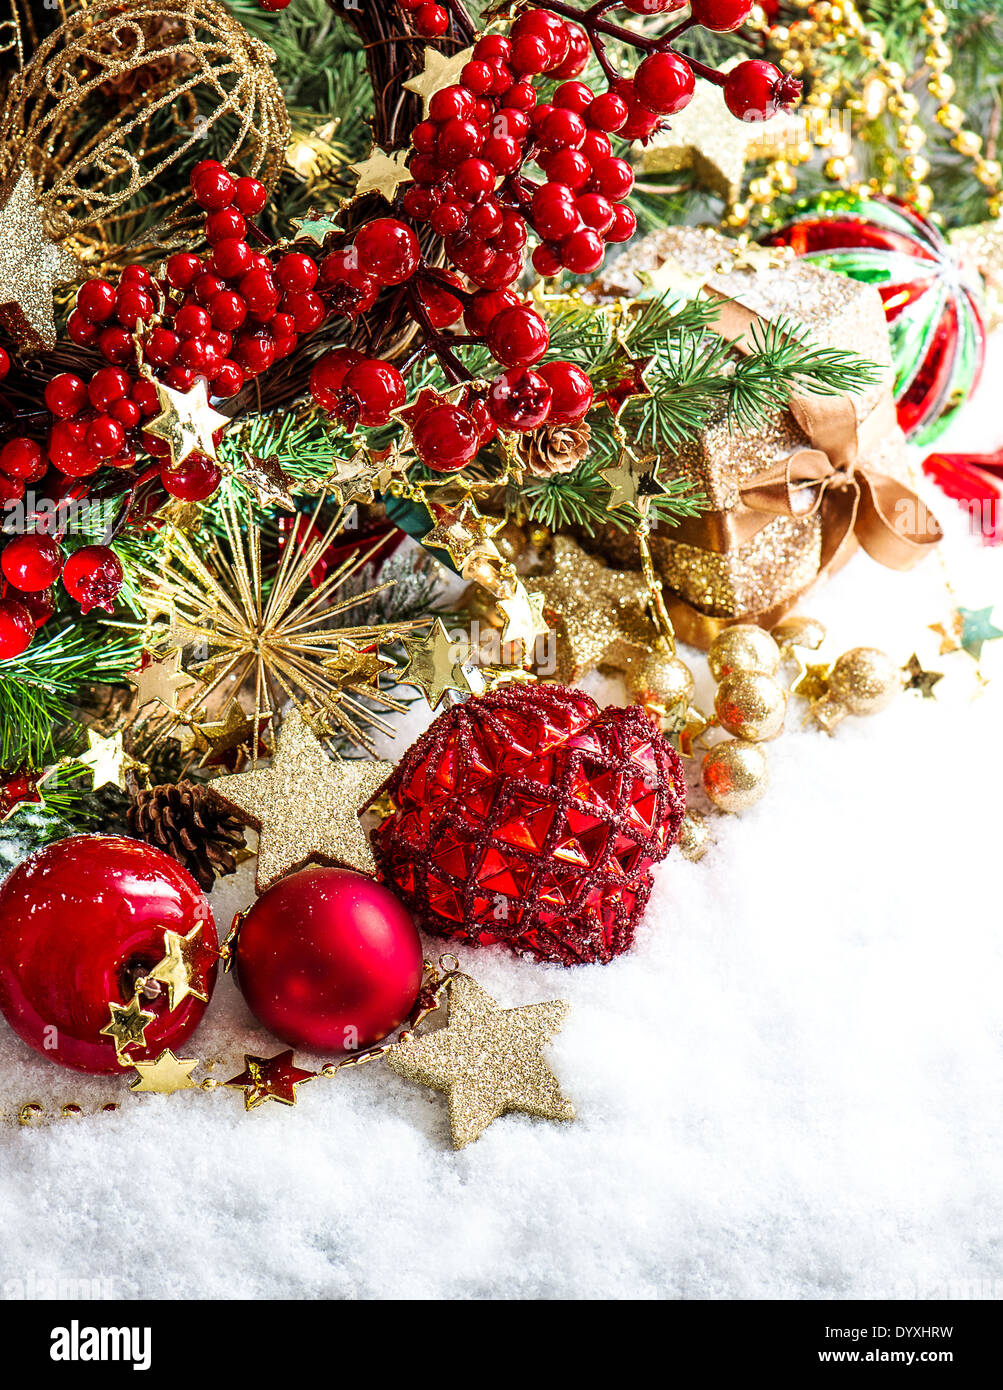 festive decoration with baubles, golden garlands, christmas tree and red berries Stock Photo